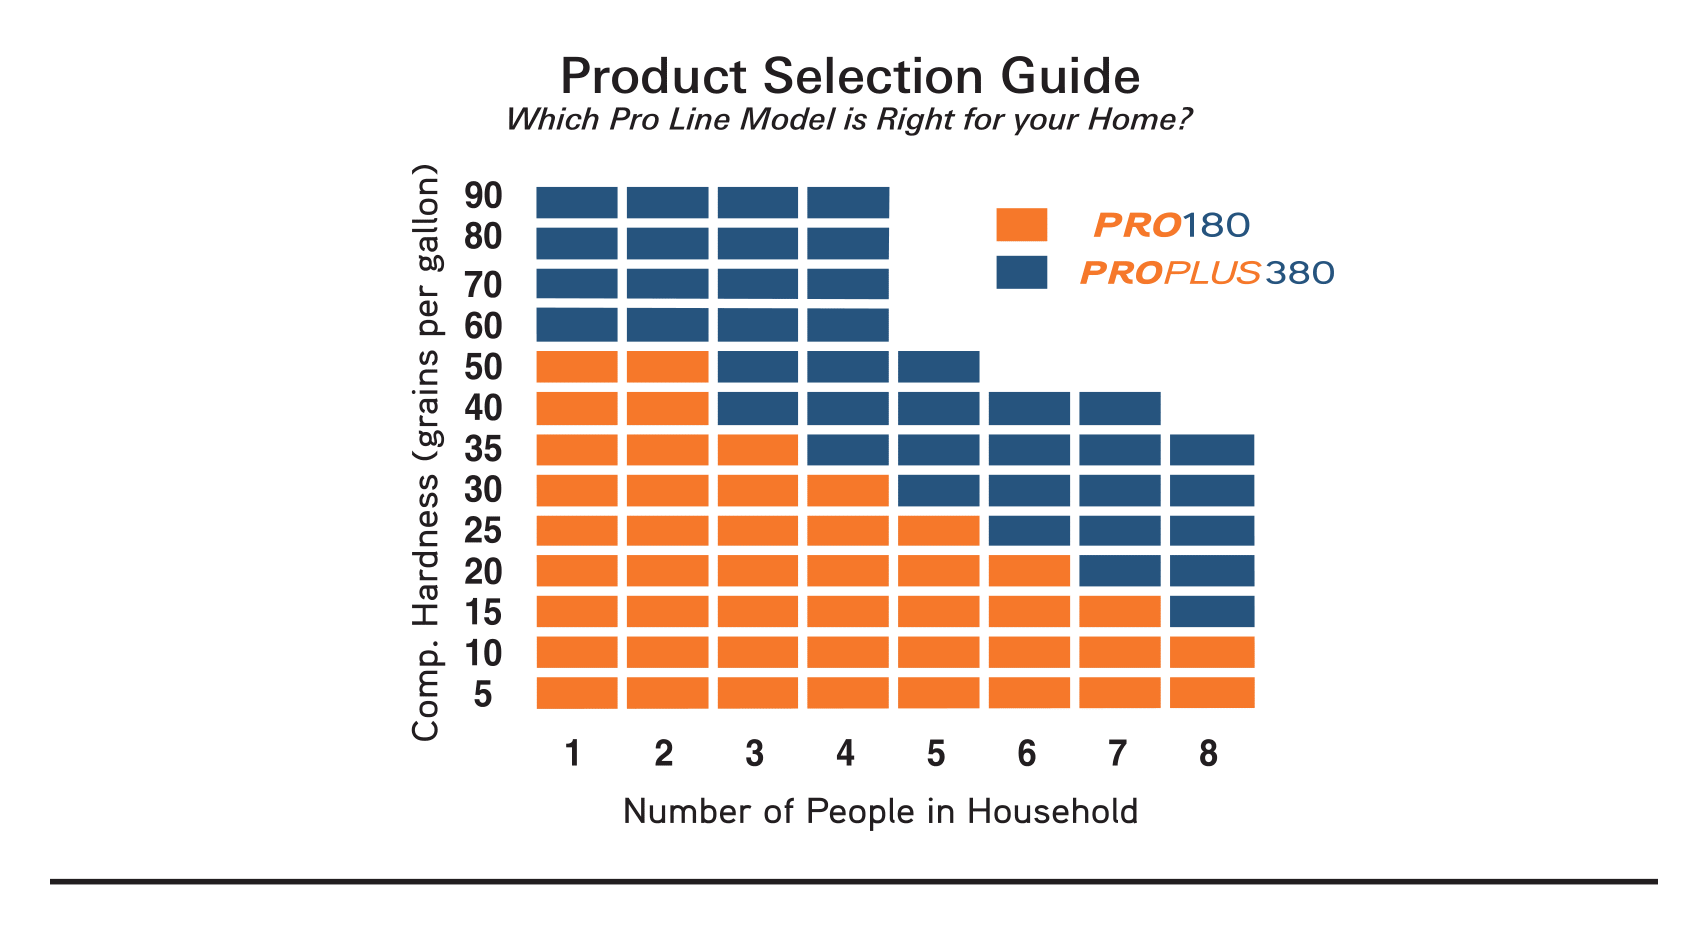 Product selection guide for WaterBoss